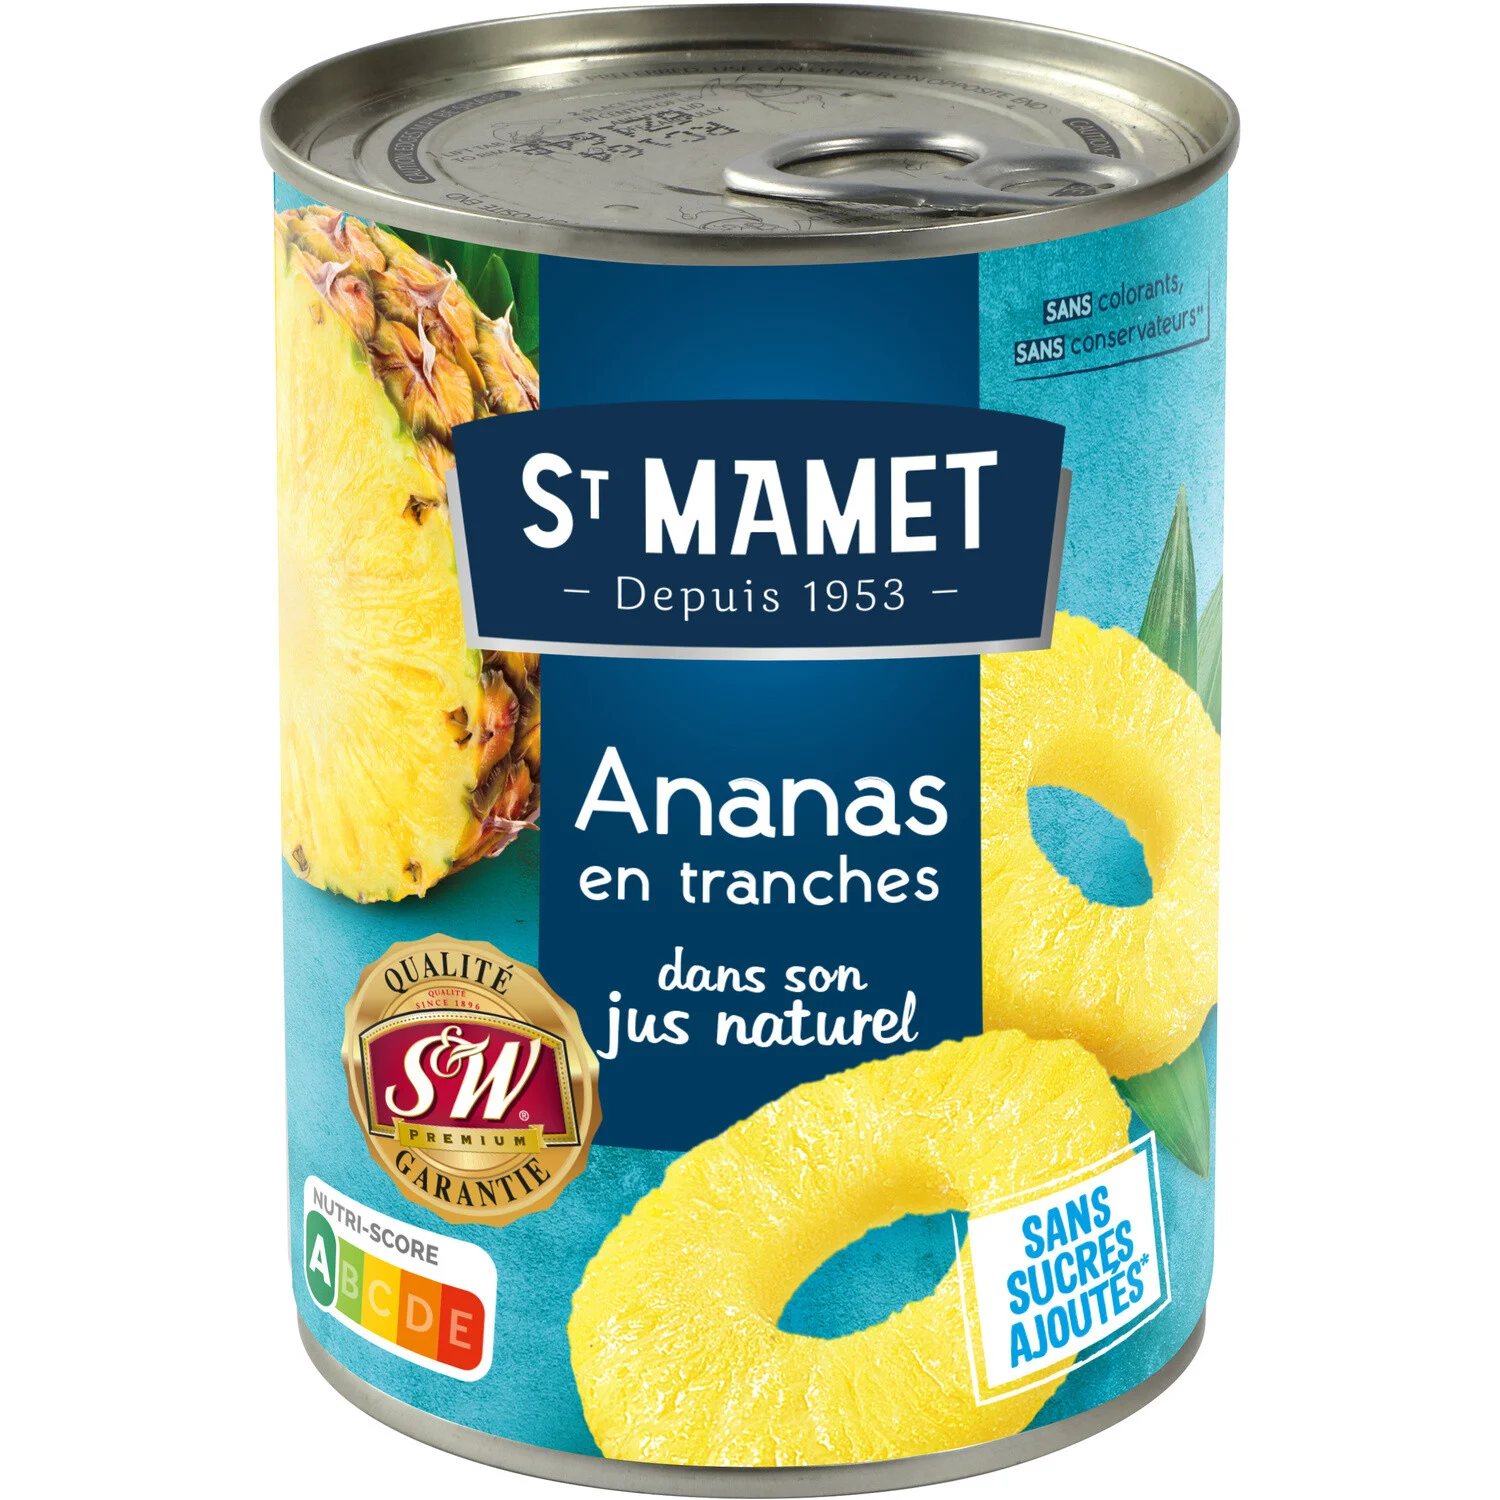 Fruits Au Sirop Ananas Tranches 345g - St Mamet